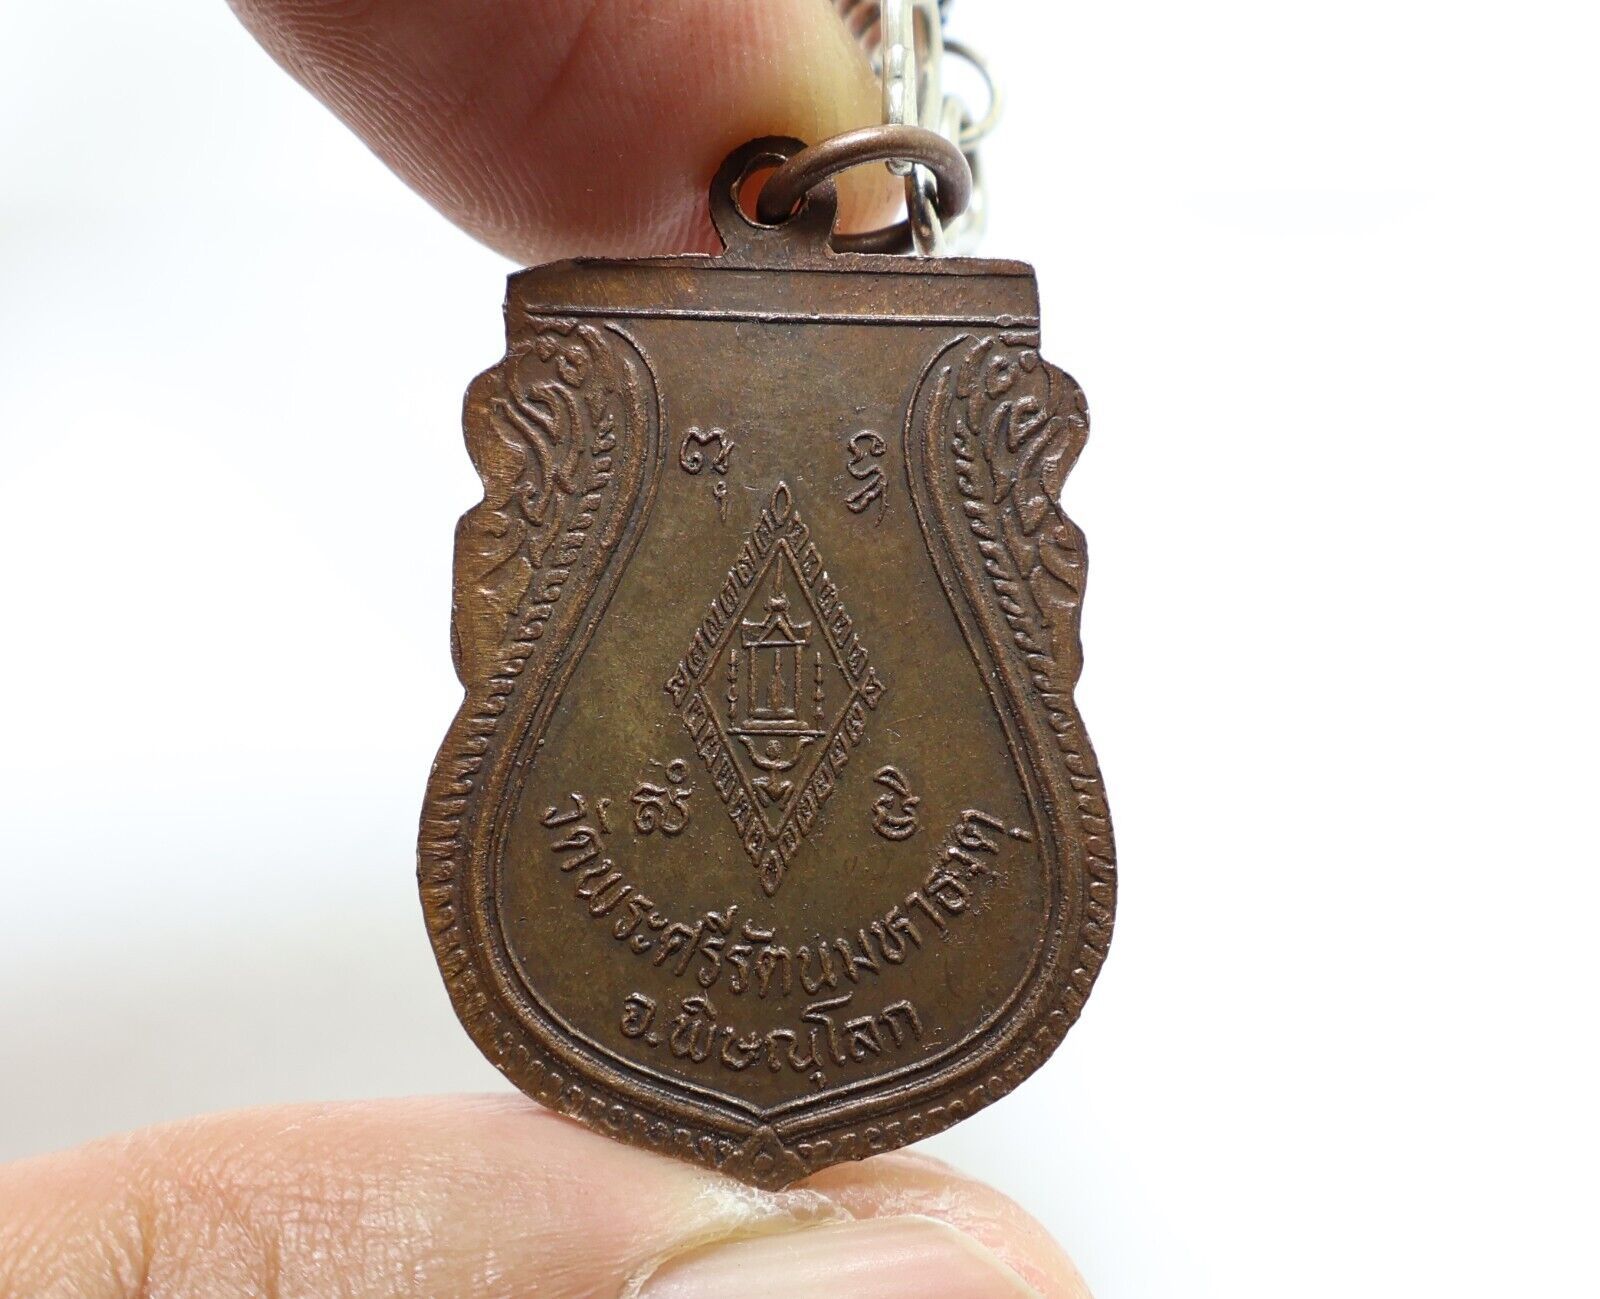 Primary image for PHRA BUDDHA CHINNARAJ AMULET 1 BLESSED 1971 THAI REAL AMULET LUCKY RICH PENDANT